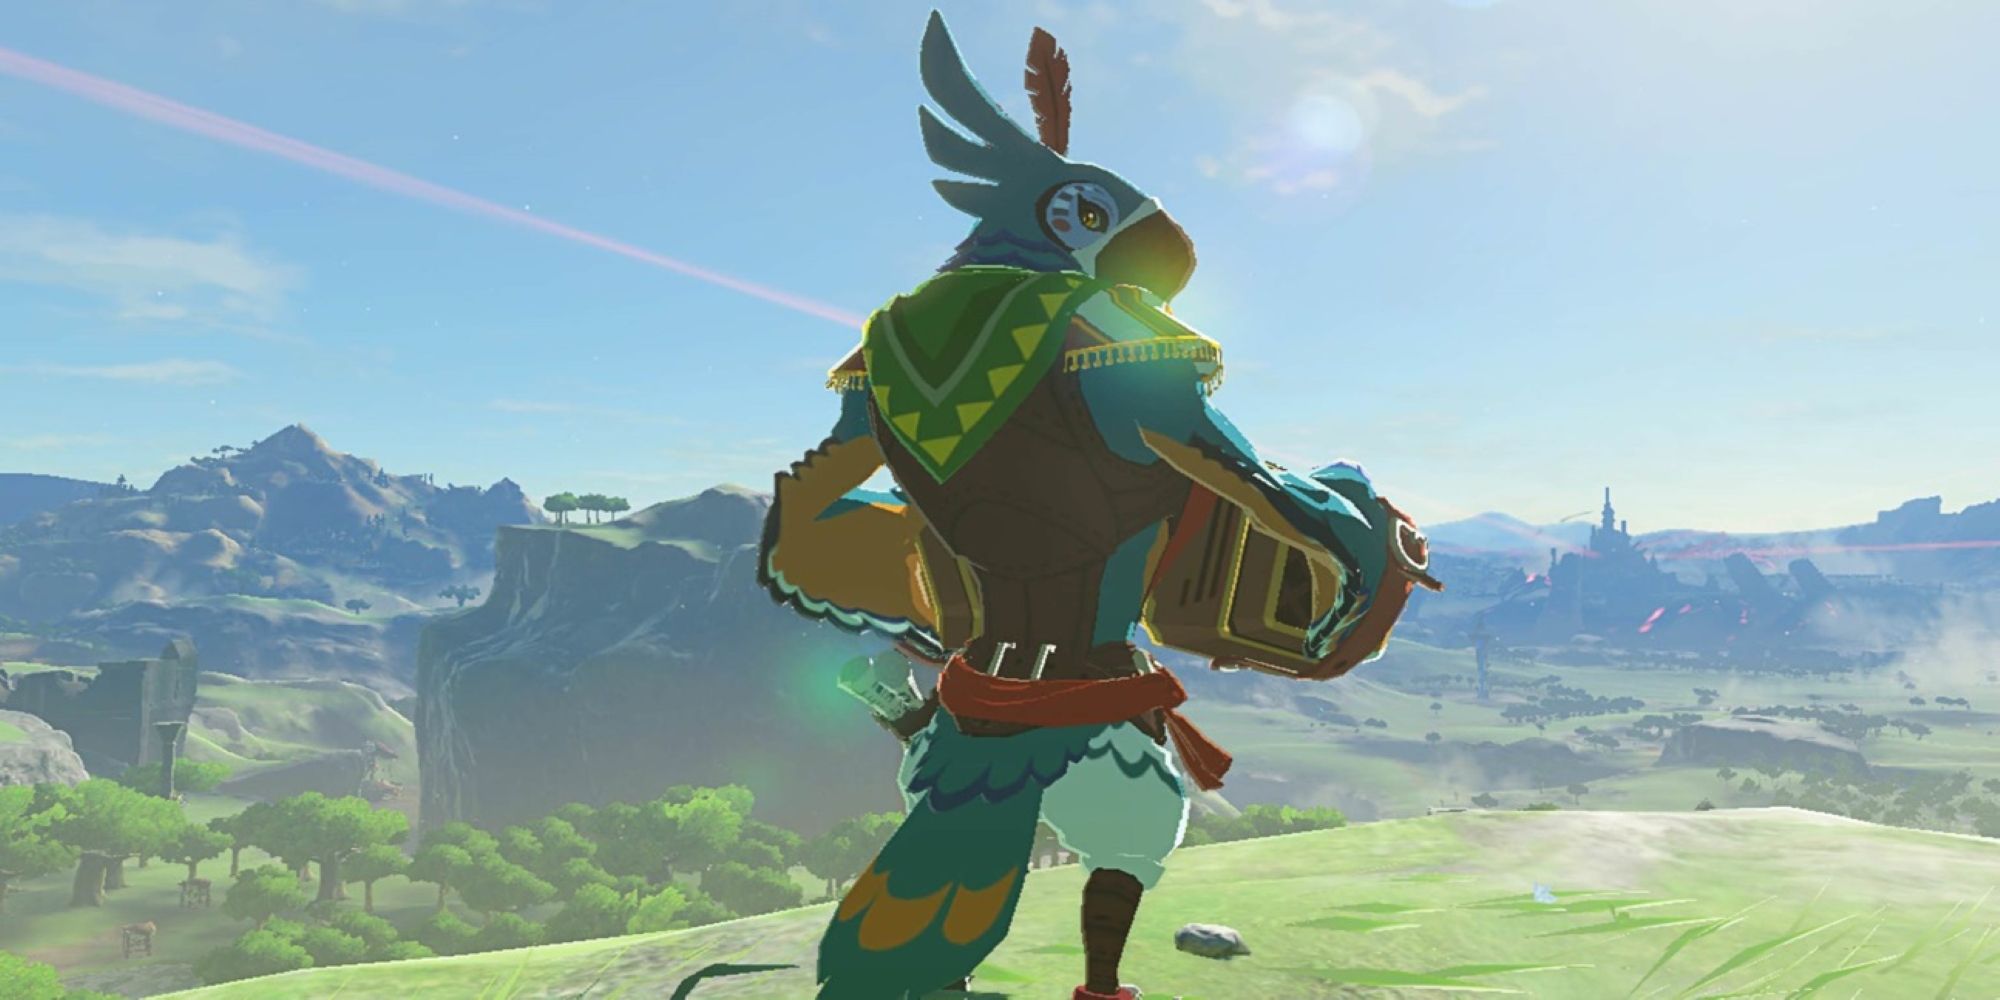 Kass from The Legend of Zelda: Breath of the Wild turns to see who approaches while playing his accordion.